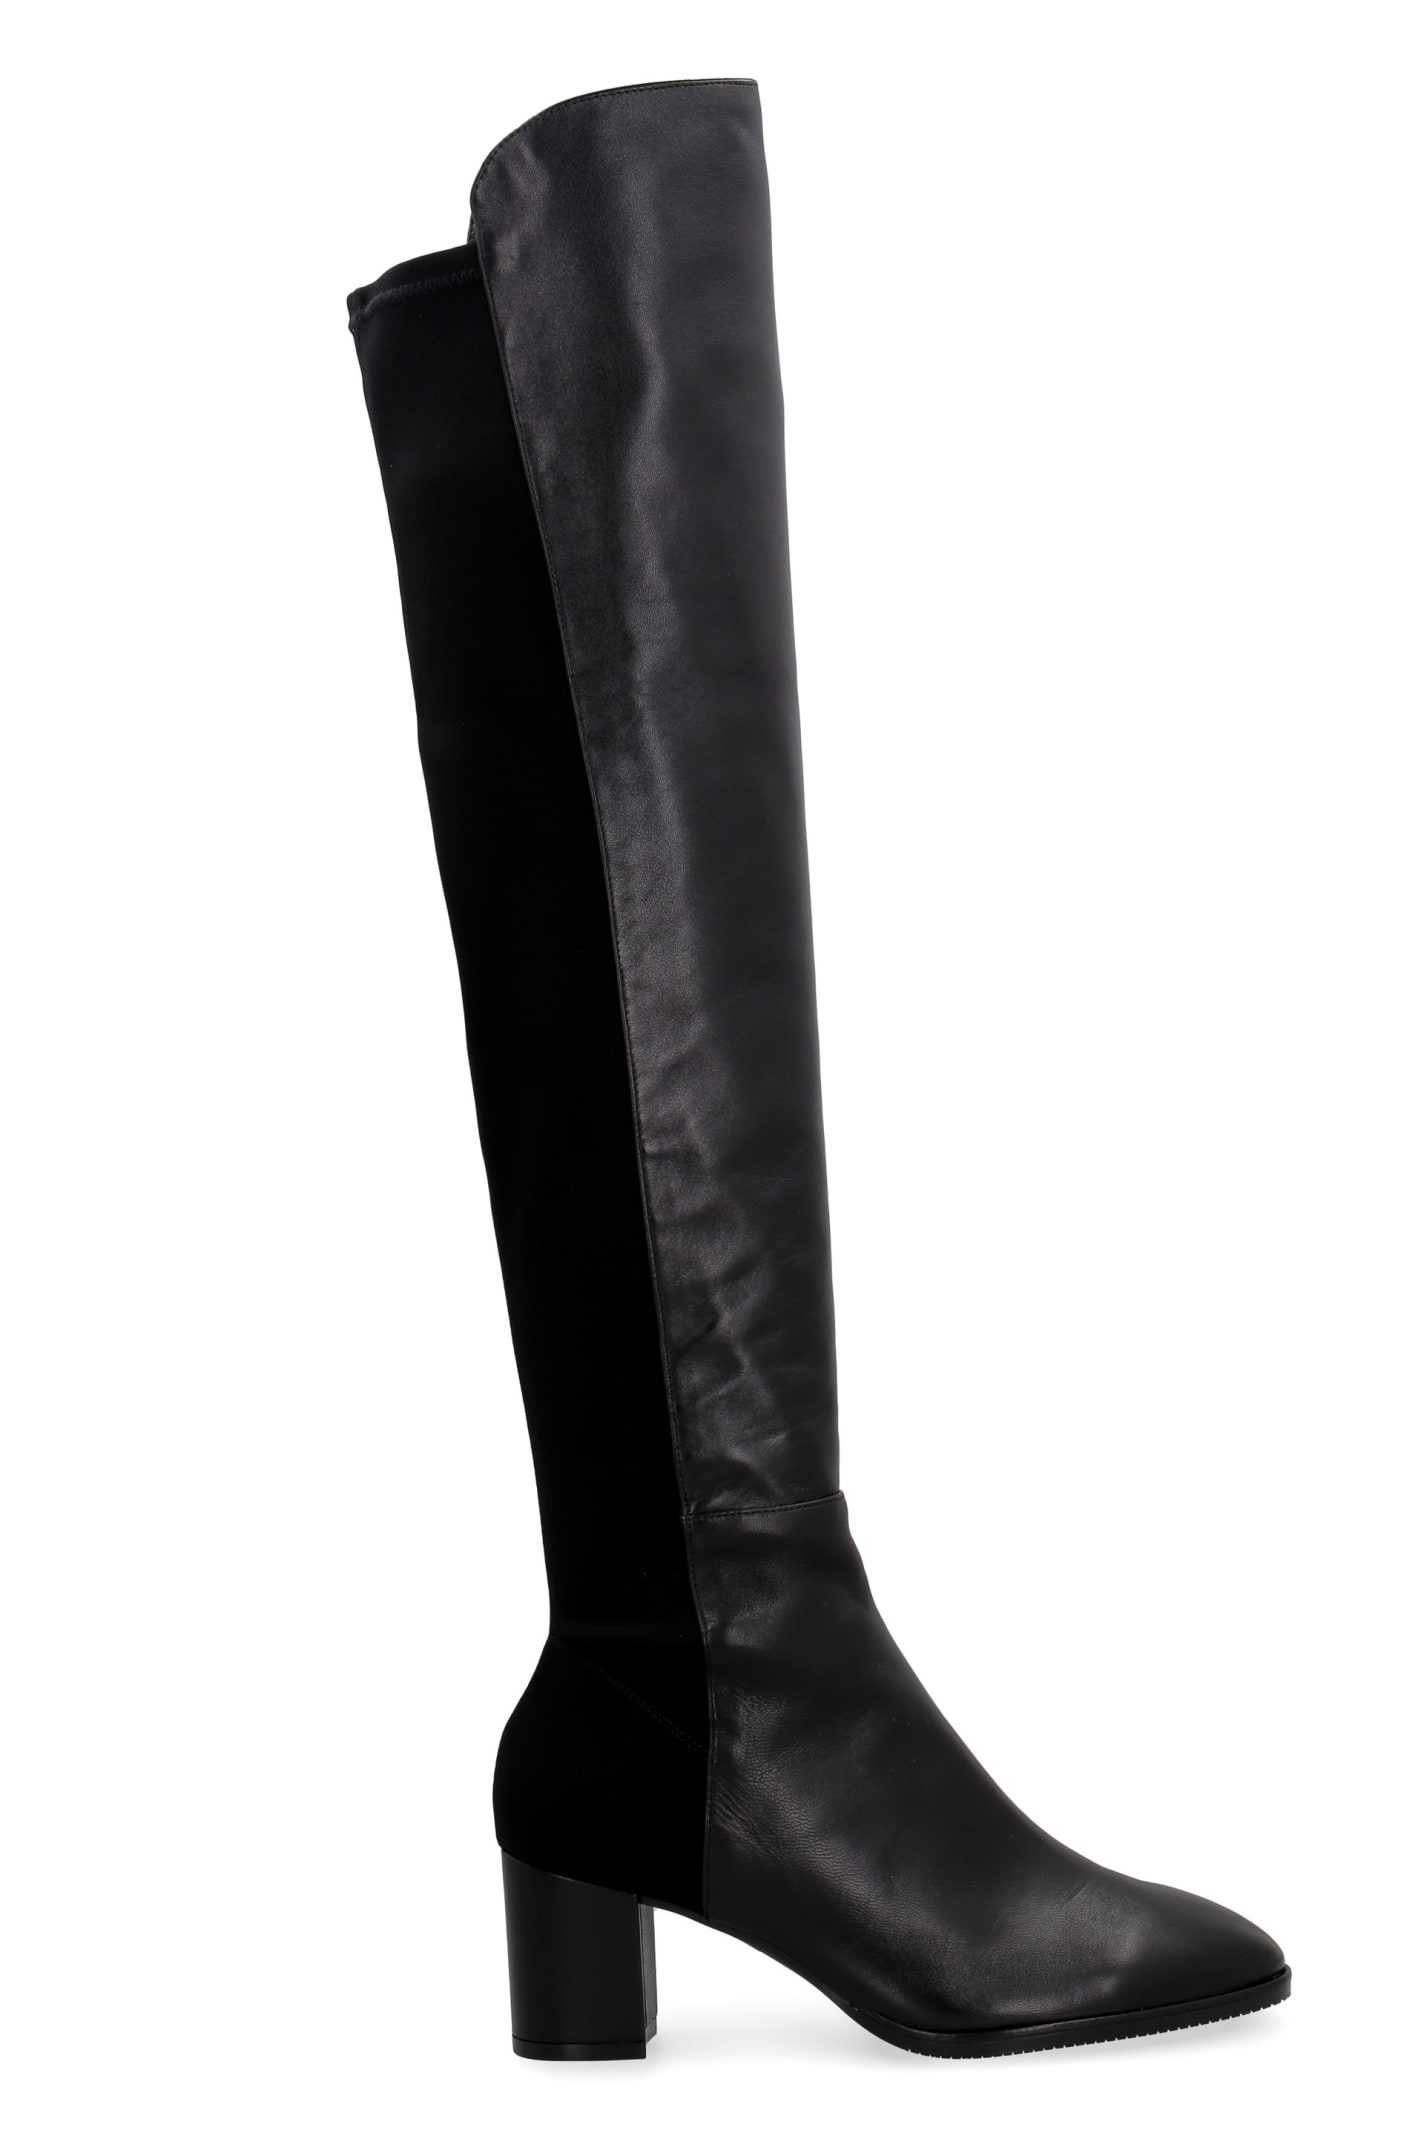 Buy Stuart Weitzman Harper 60 Leather Over-the-knee Boots online, shop Stuart Weitzman shoes with free shipping